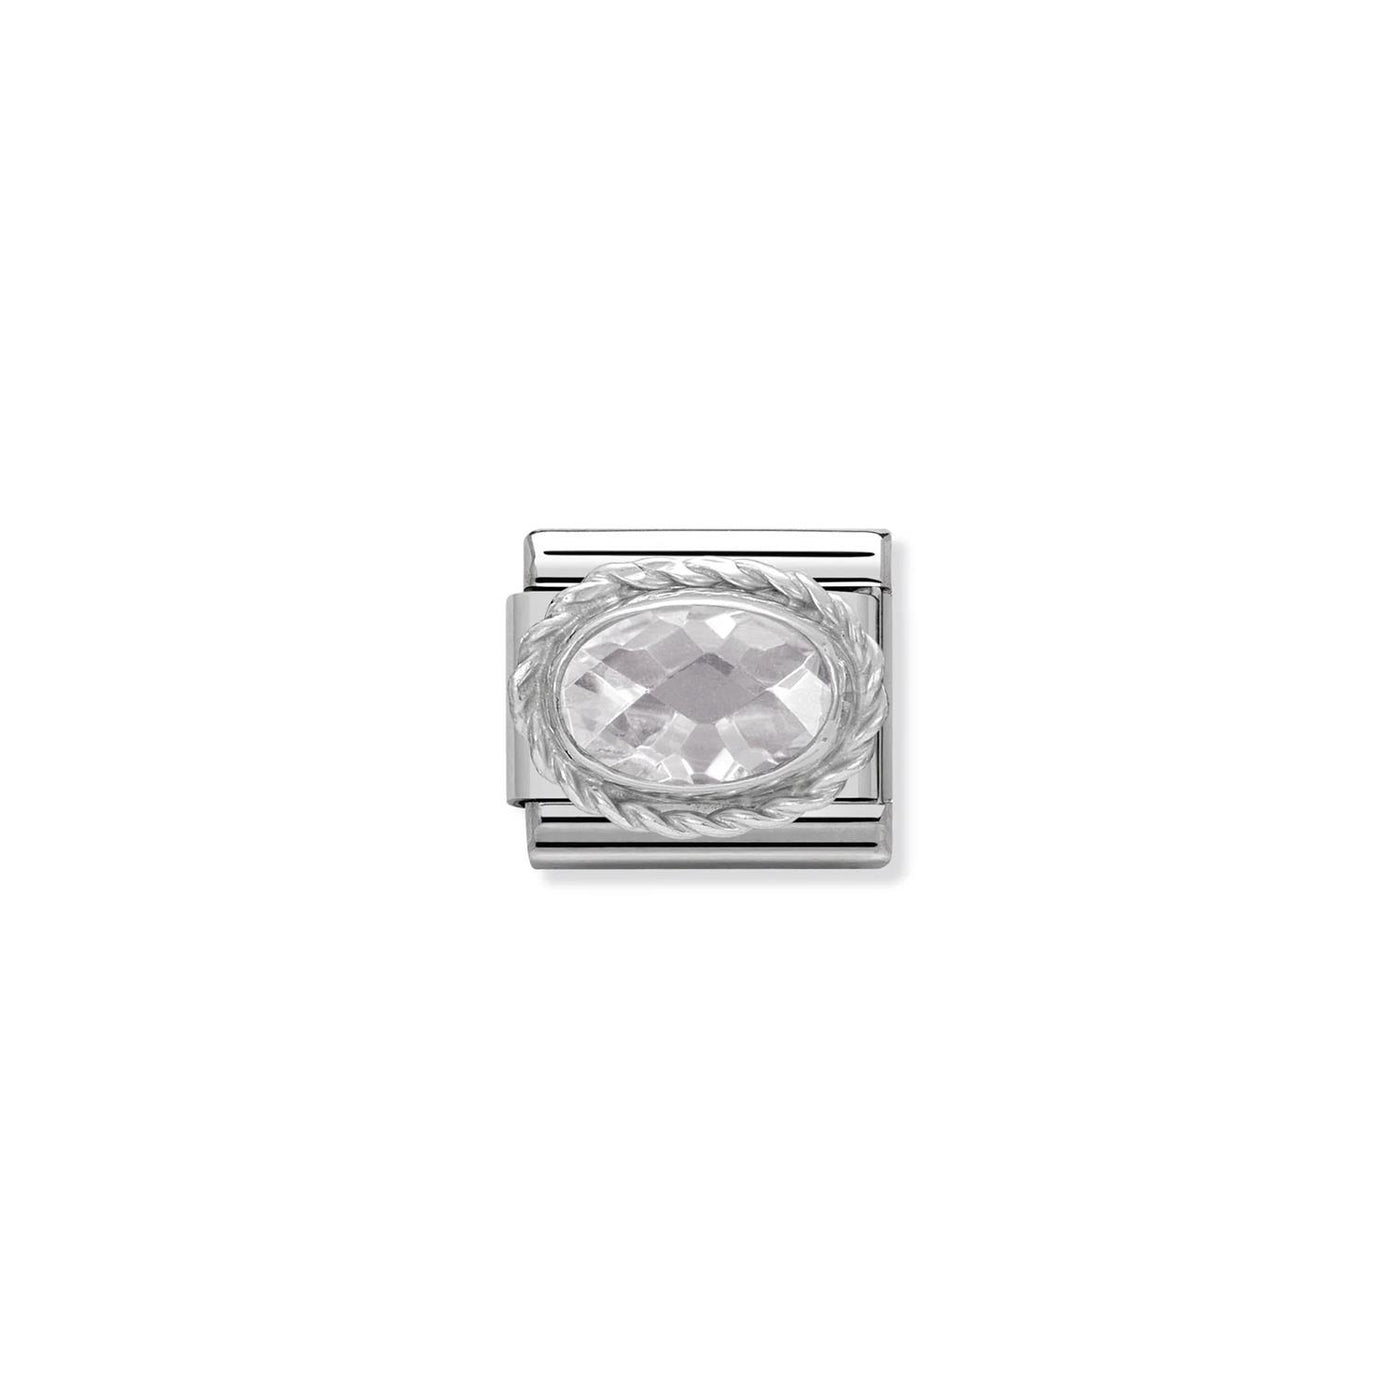 Faceted CZ 925 sterling silver setting and CZ White